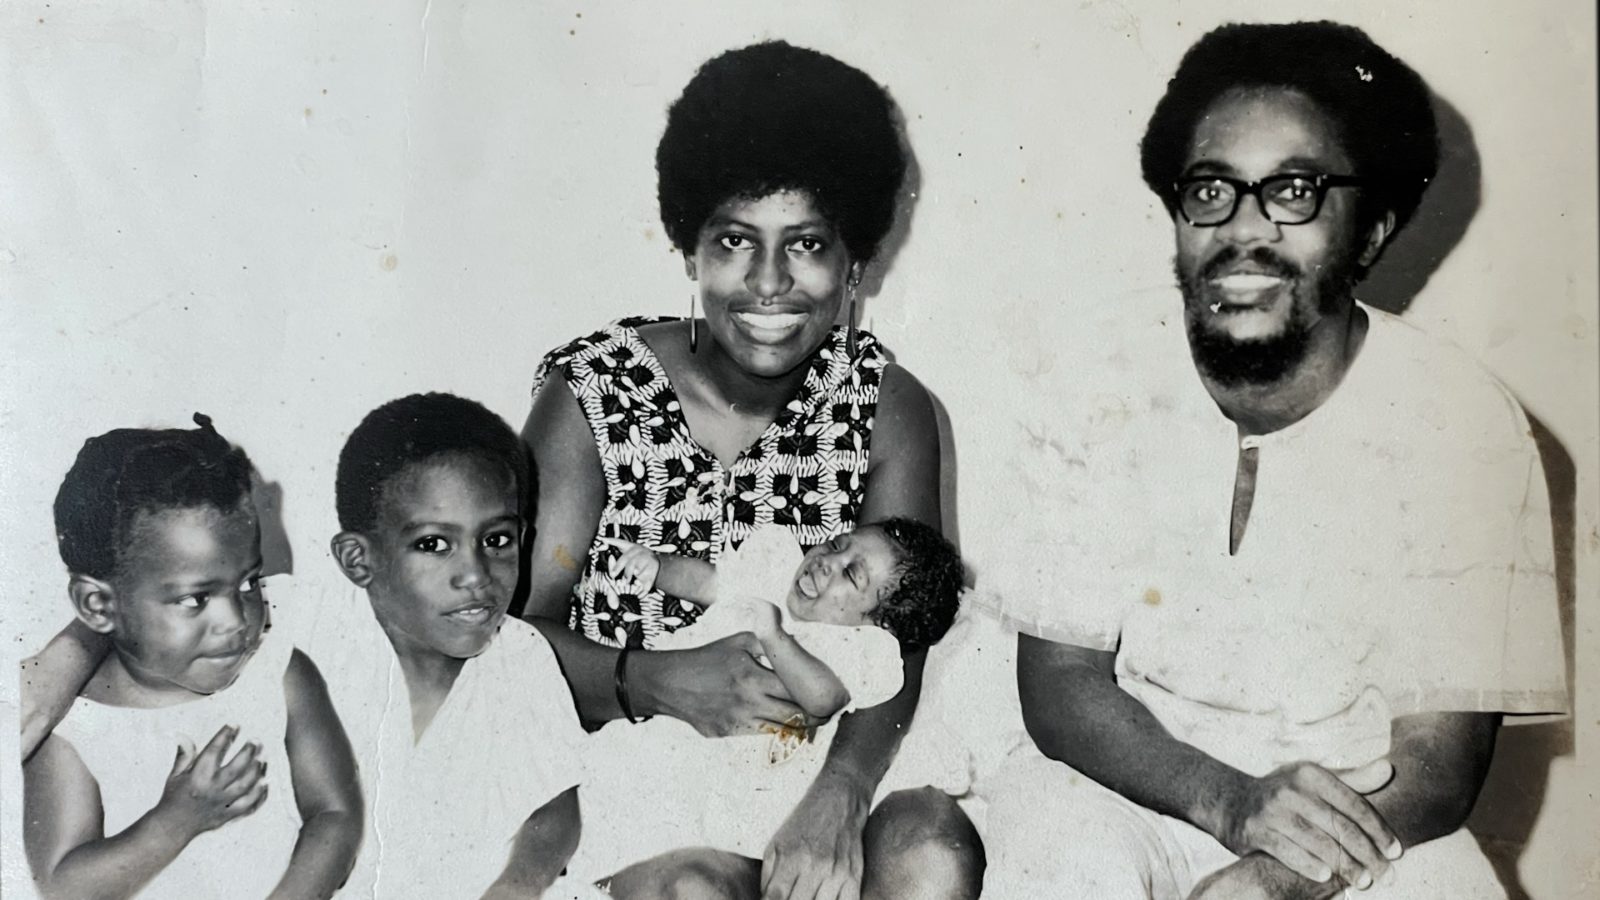 Family photo with Walter Rodney, his wife Patricia Rodney and their three children. Walter and Patricia are both smiling as they look into the camera